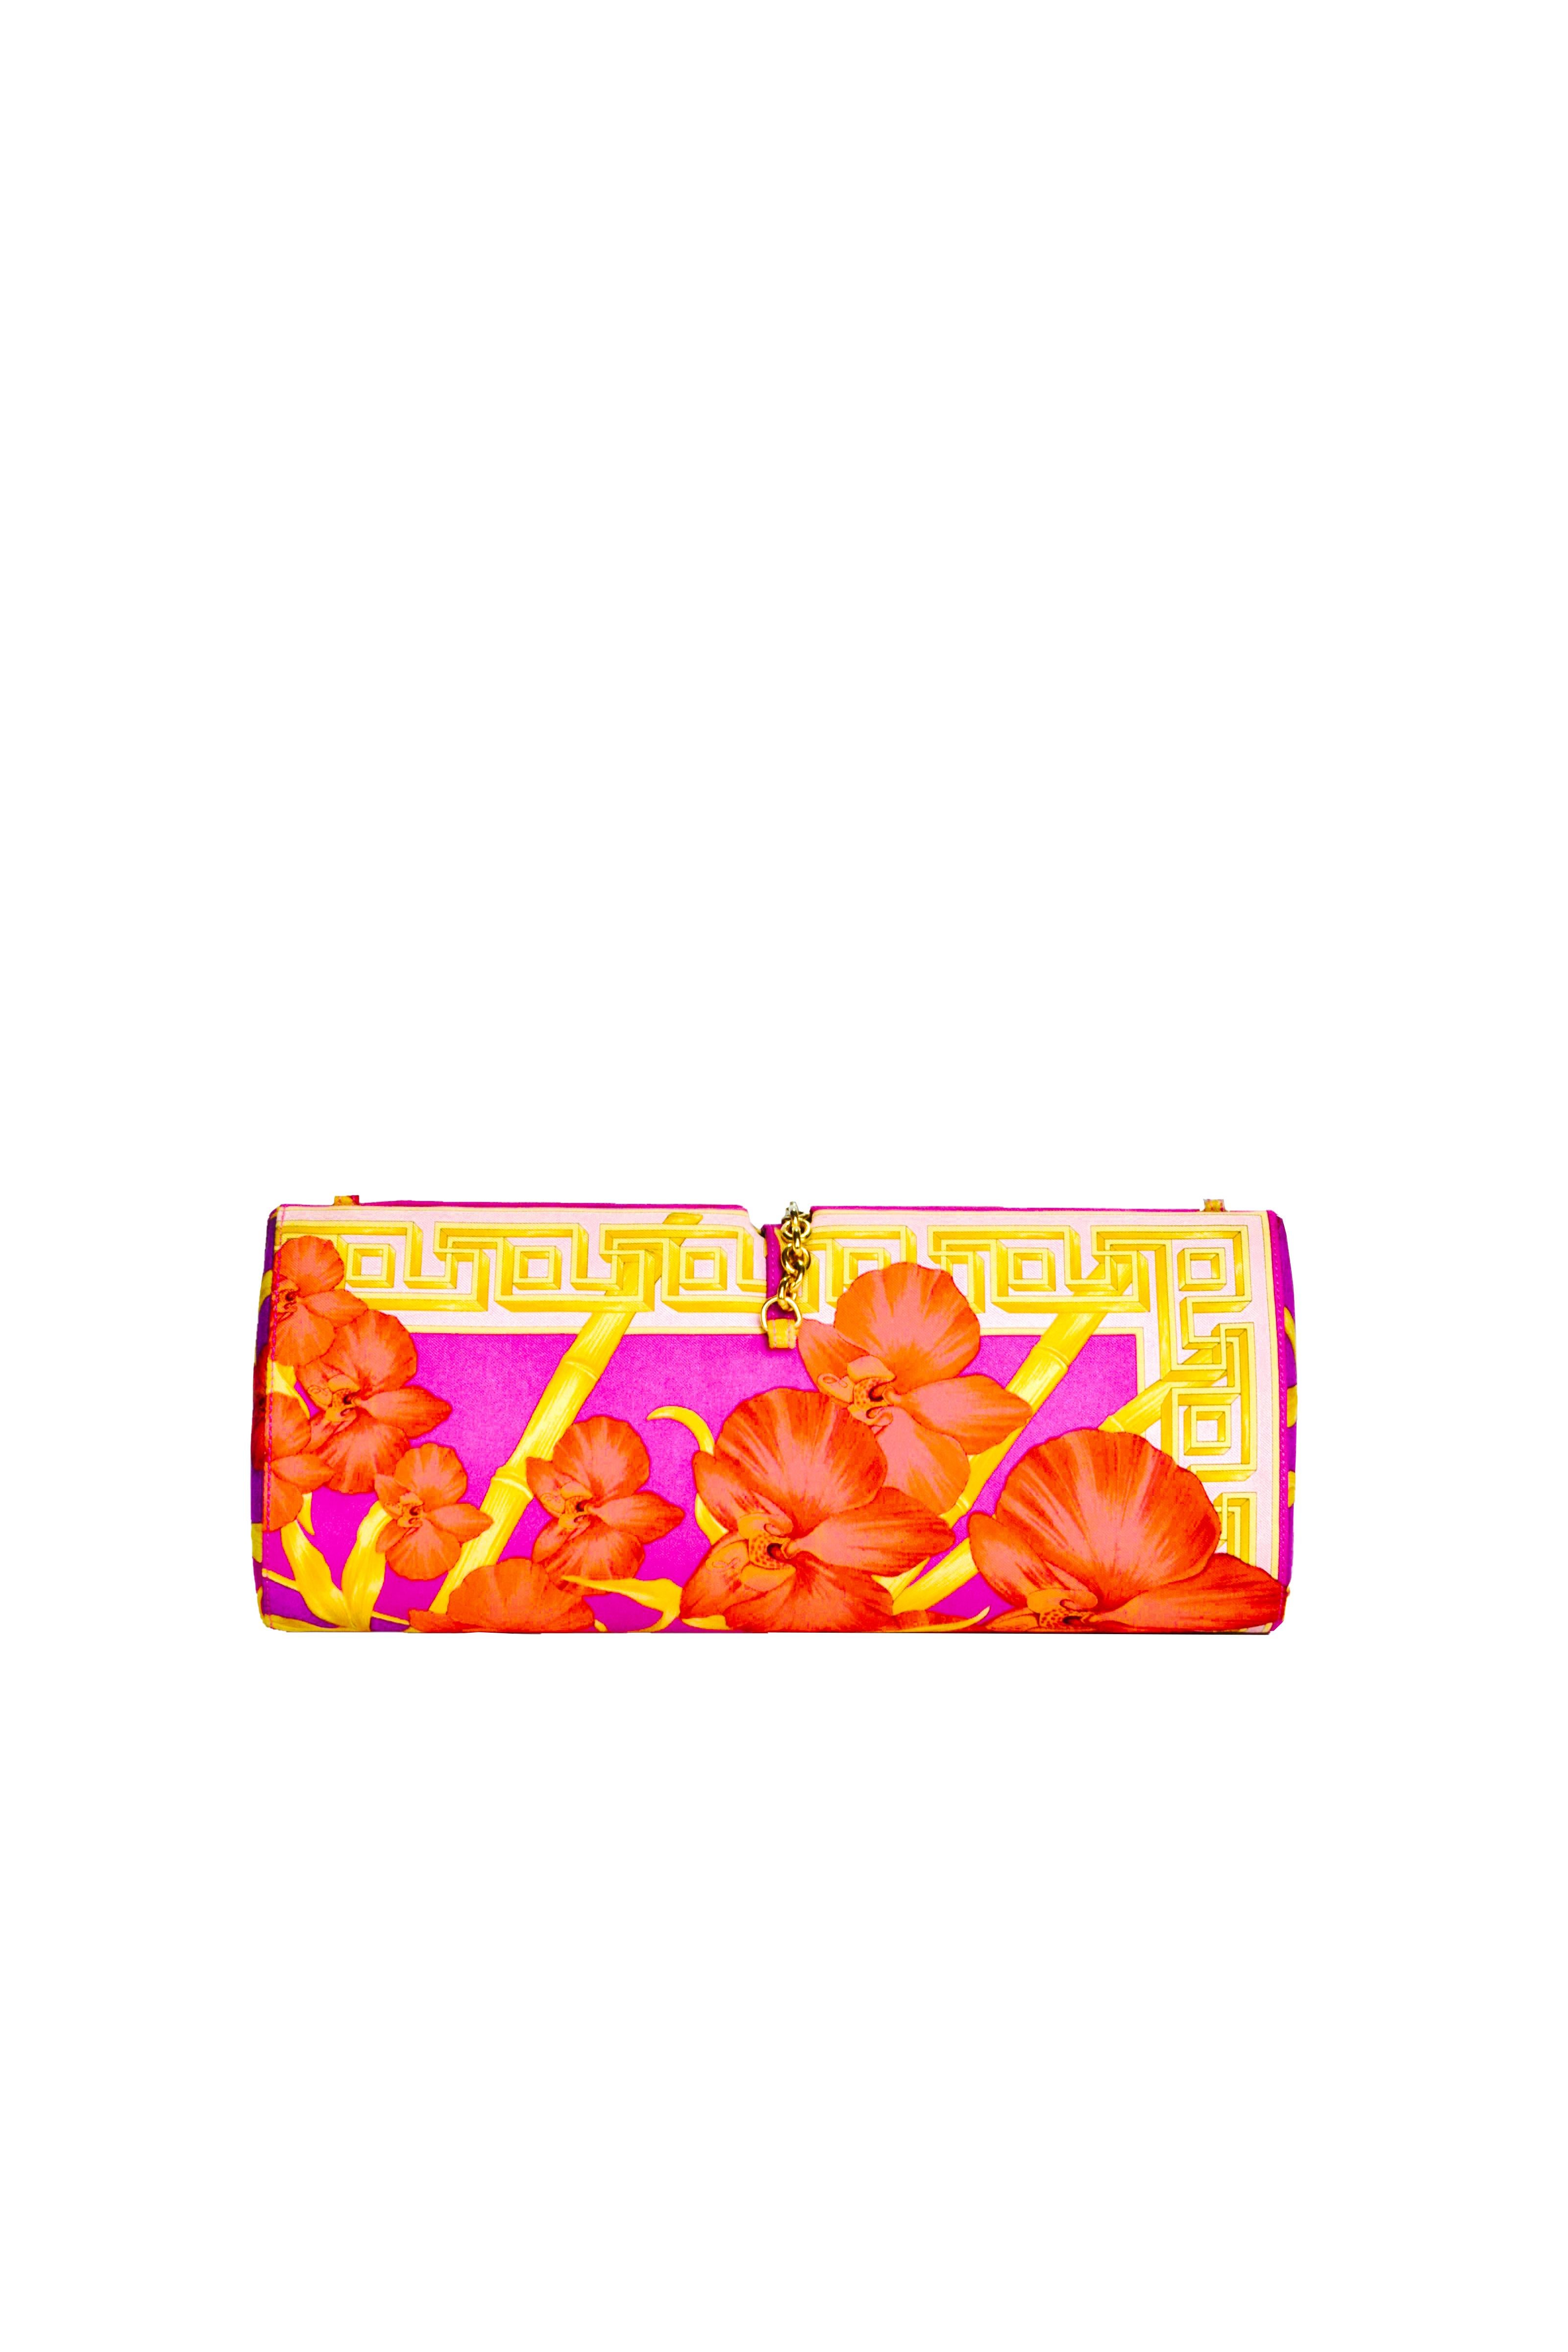 S/S 2000 Gianni Versace by Donatella Runway Pink Printed Silk Convertible Clutch For Sale 2